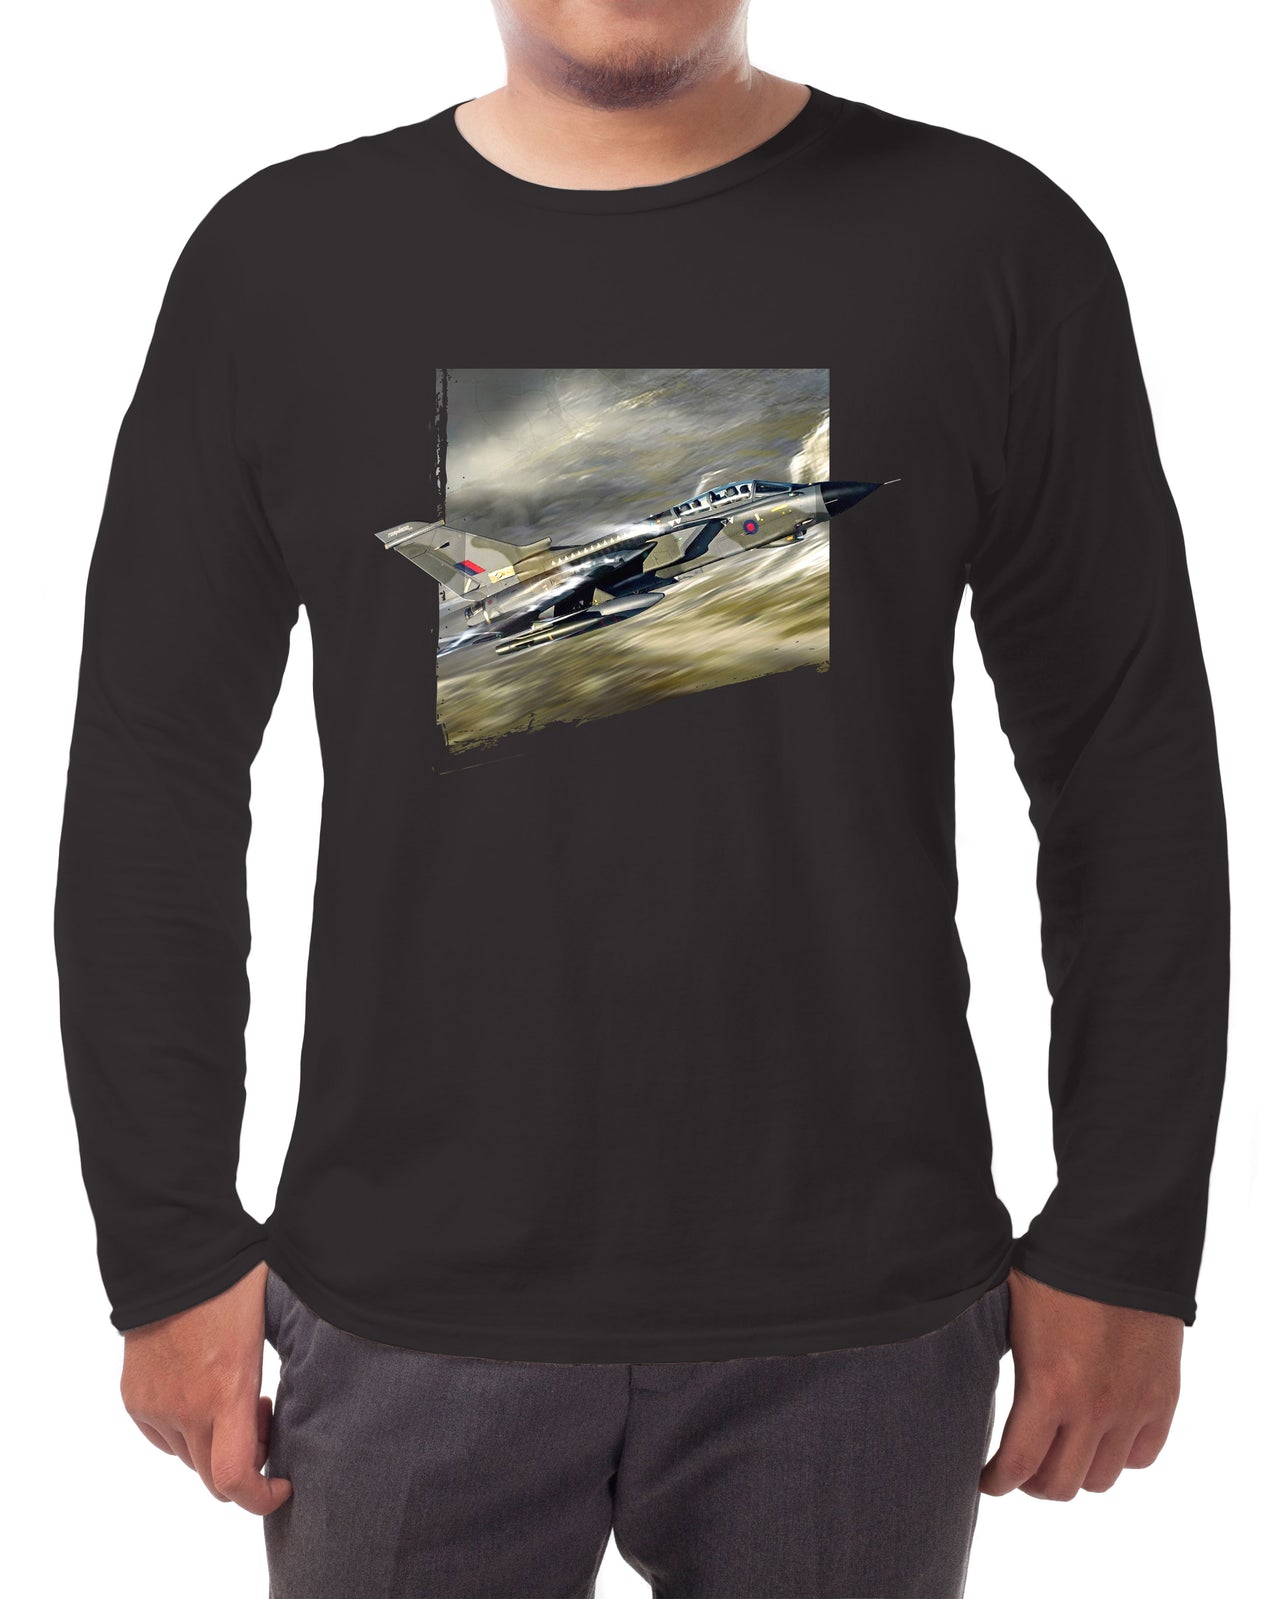 Tornado low and fast - Long-sleeve T-shirt